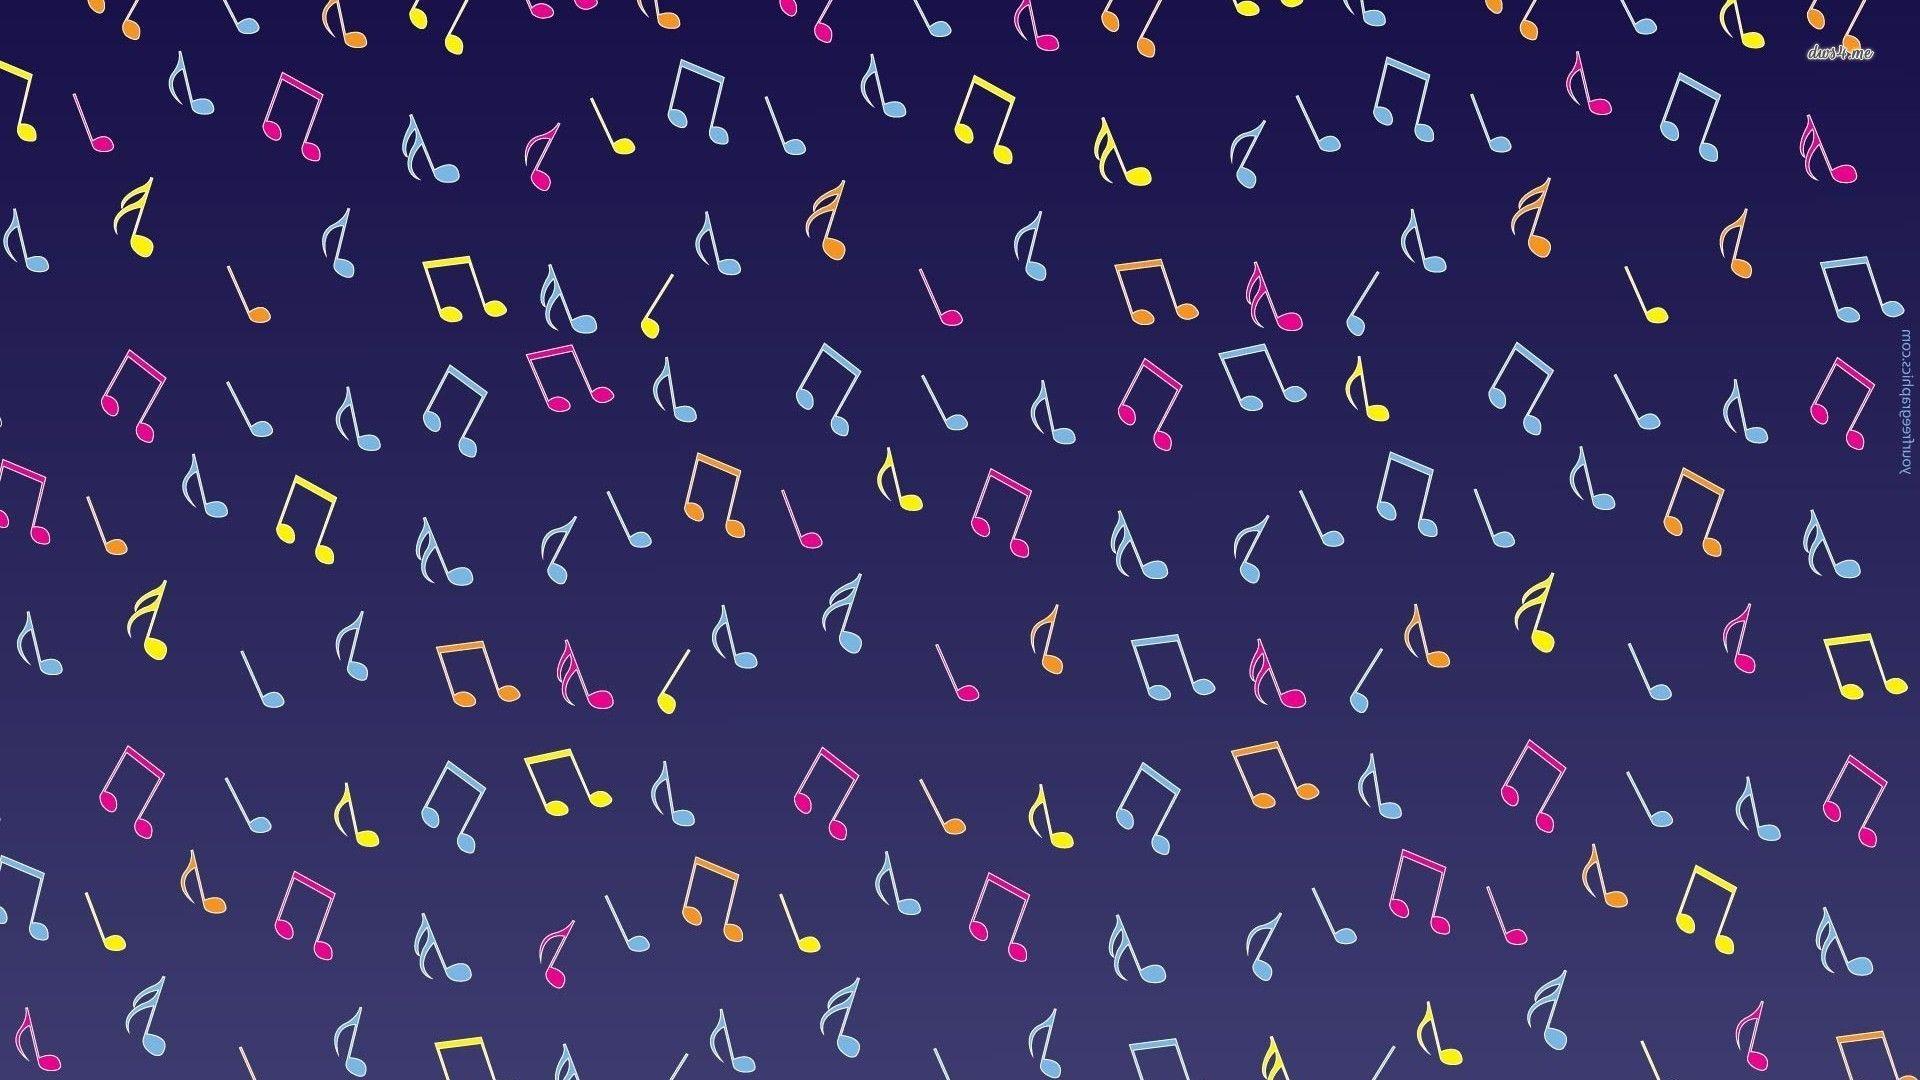 Musical Notes Wallpaper, HD Image Musical Notes Collection